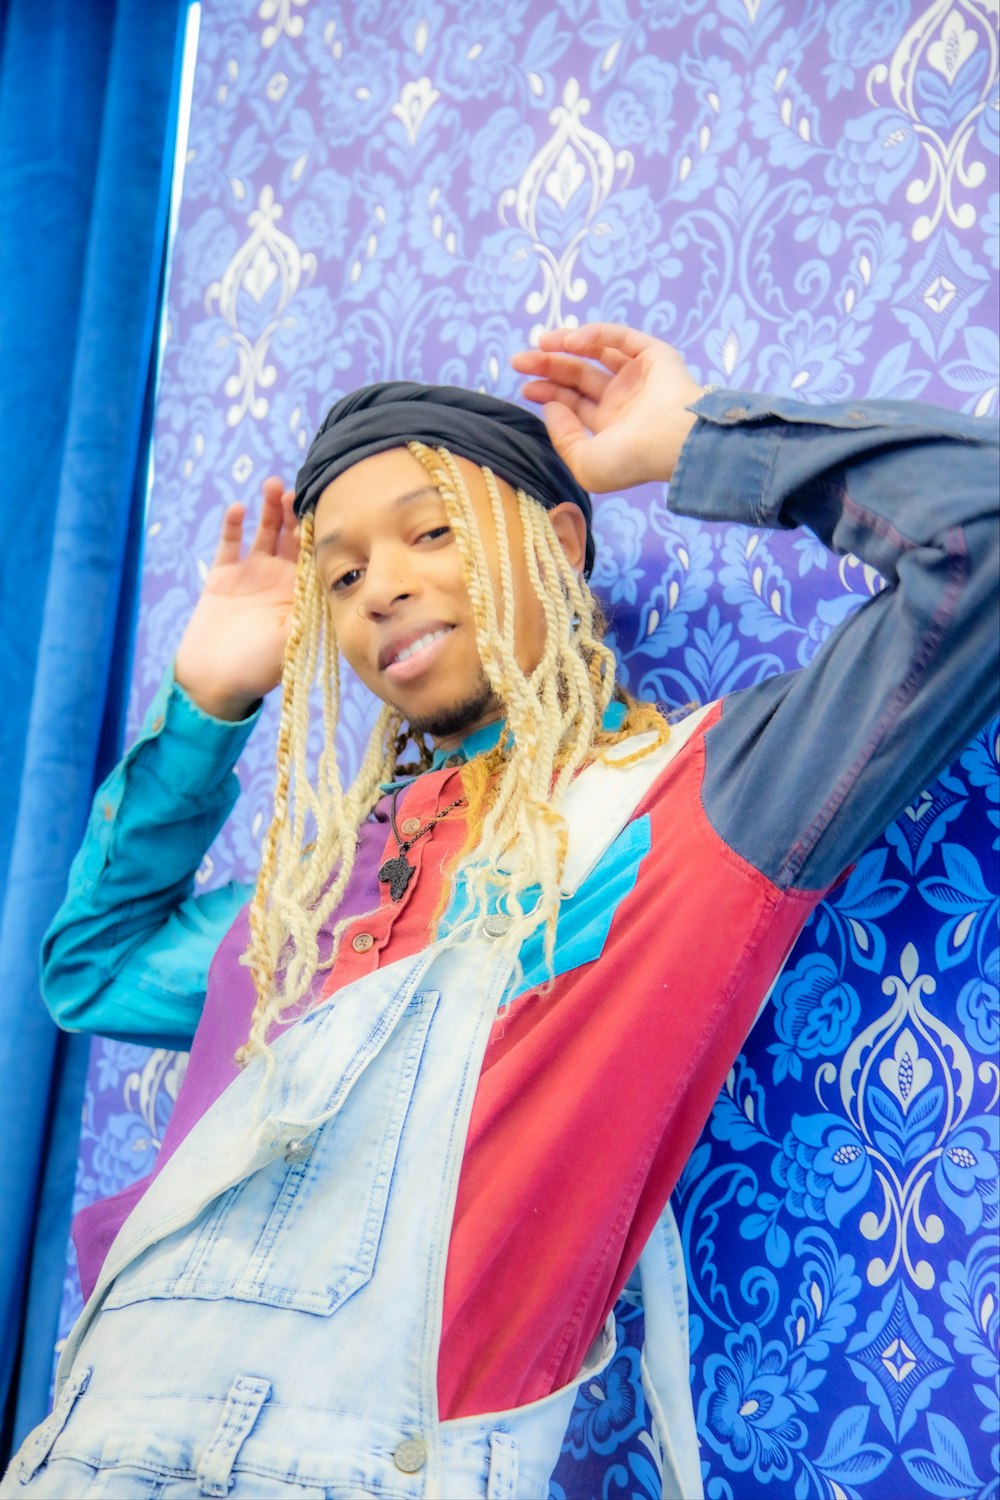 a woman with long blonde dreadlocks standing in front of a blue wall